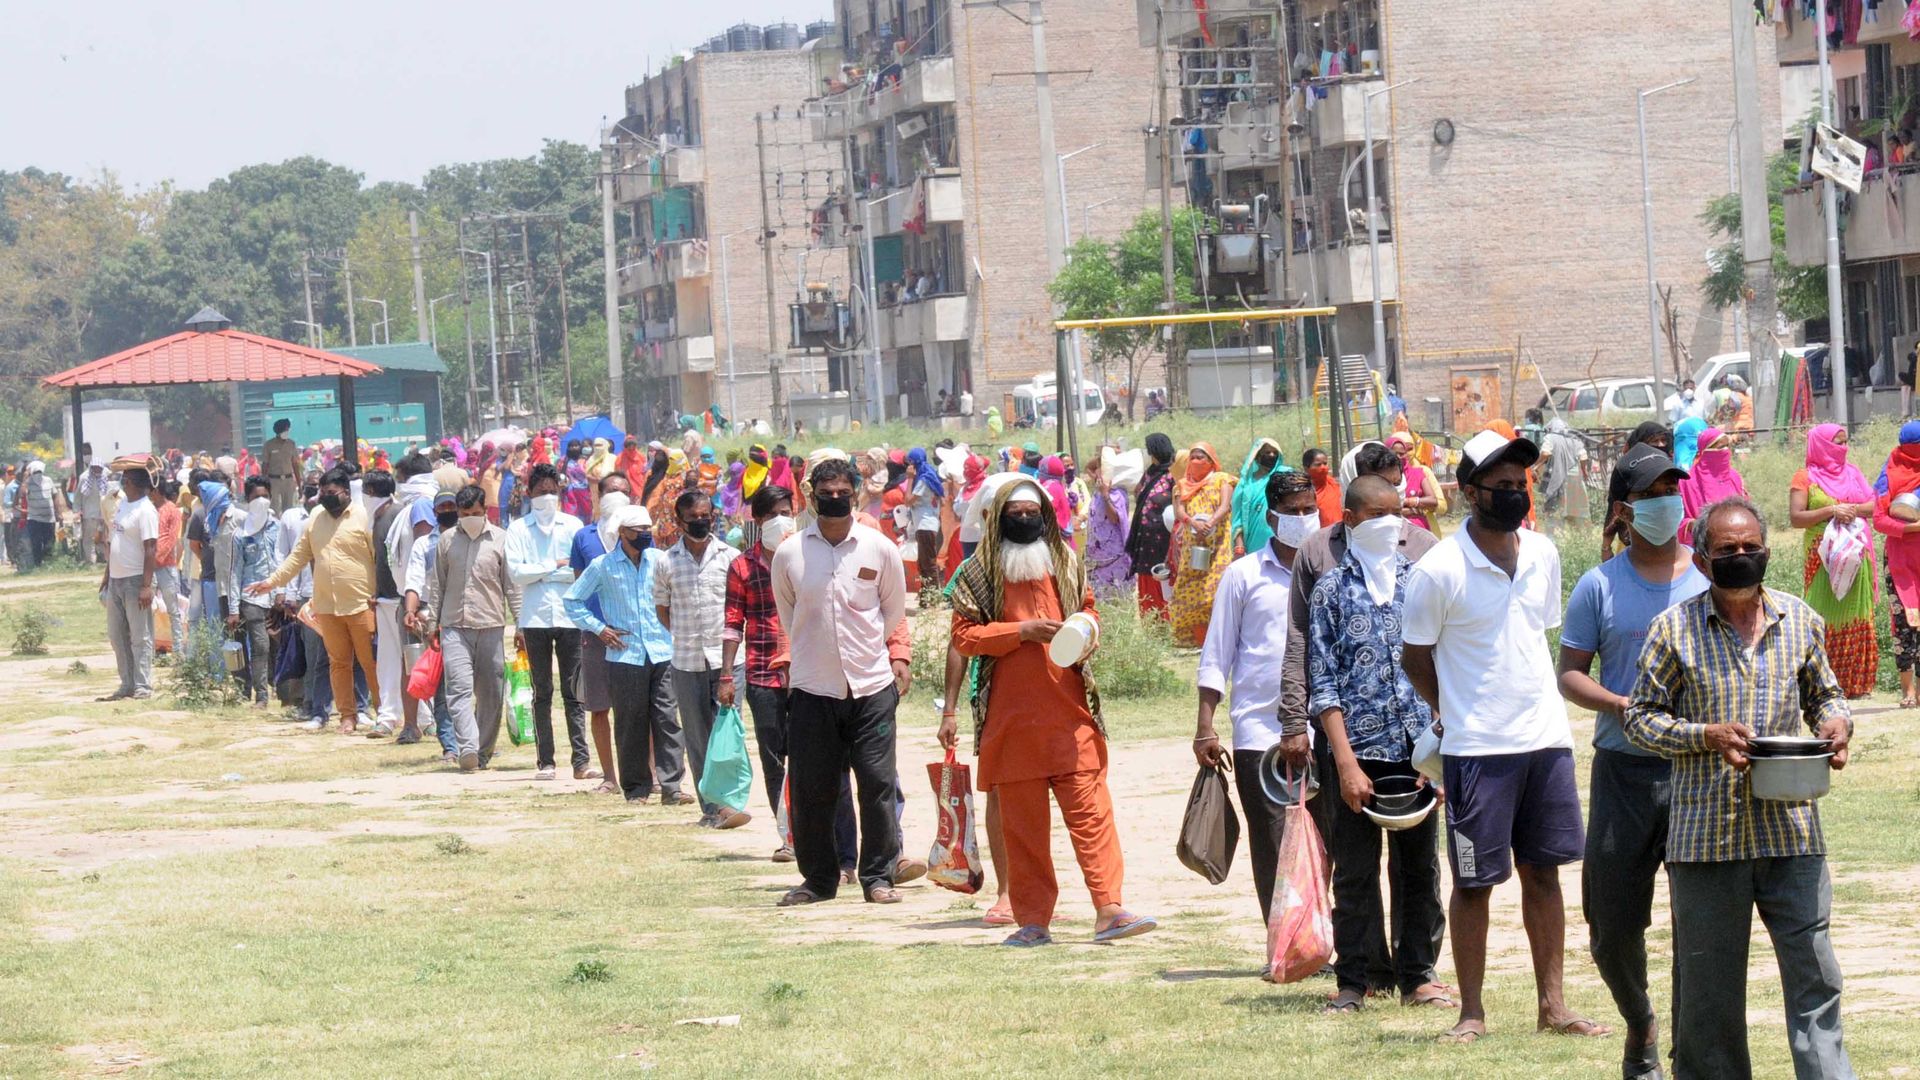 In this image, a long line of masked people stand in line outside